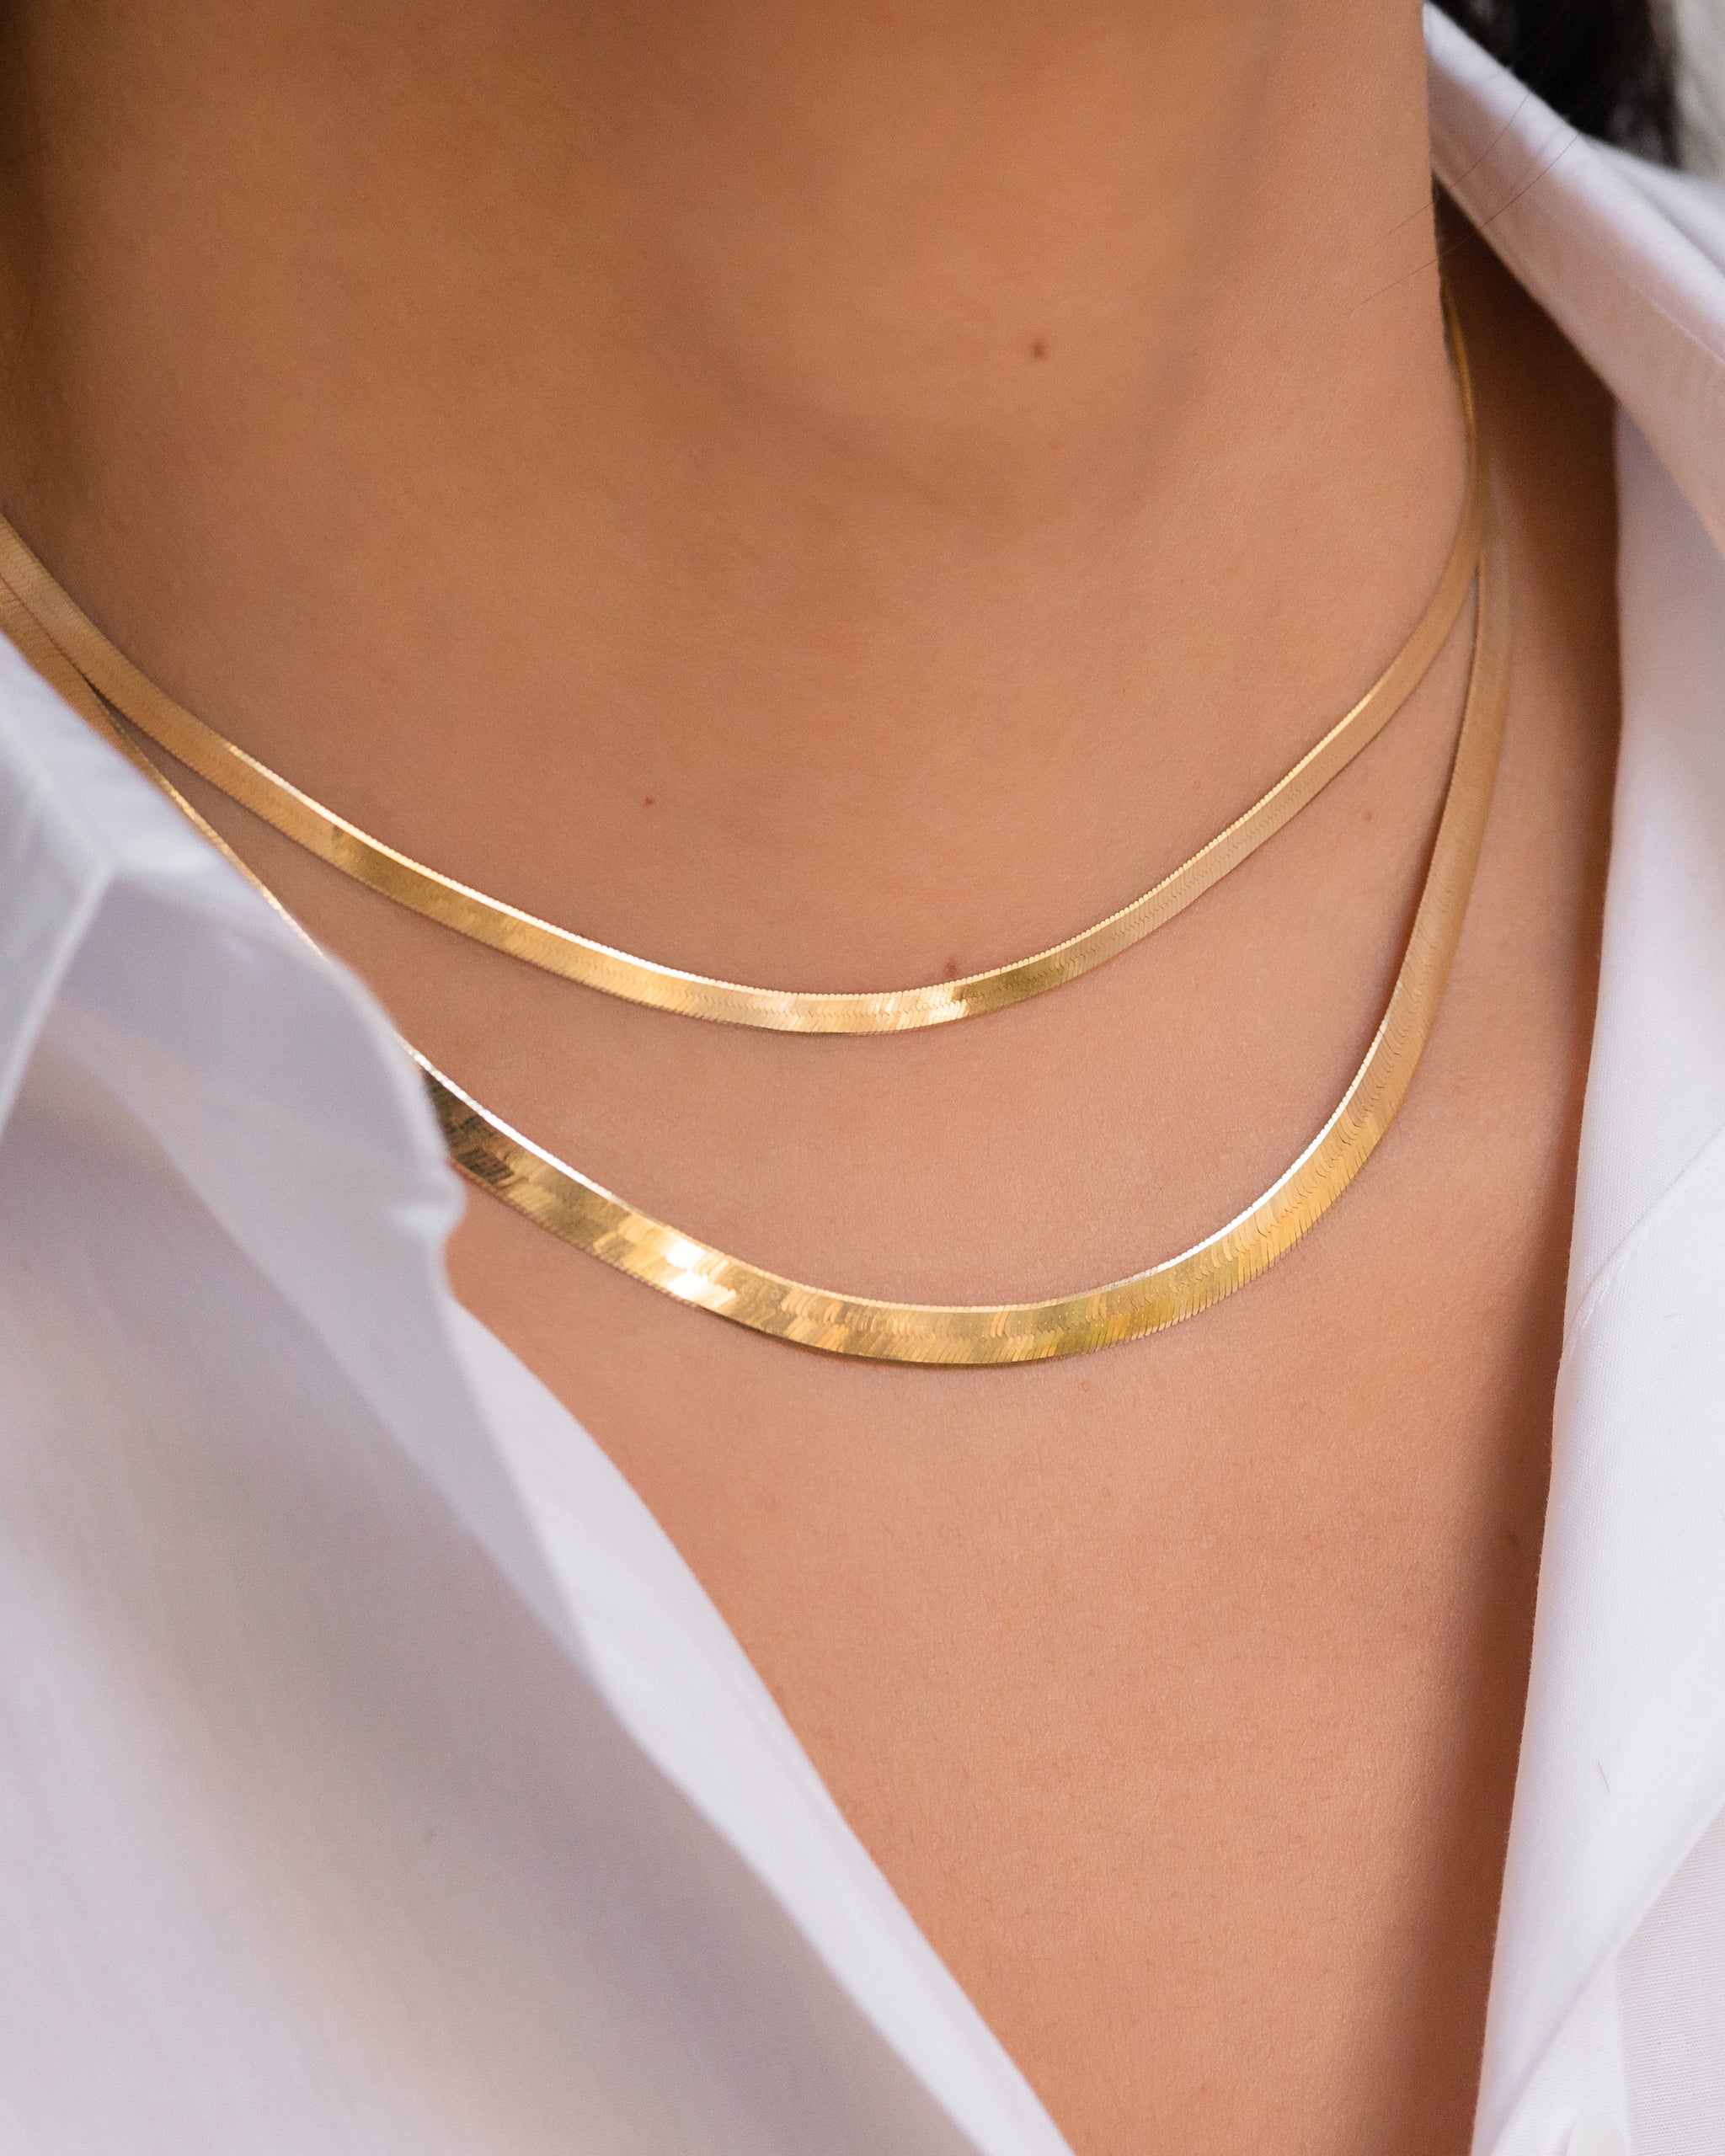 14k Real Yellow Gold Herringbone Snake Chain Necklace – NORM JEWELS